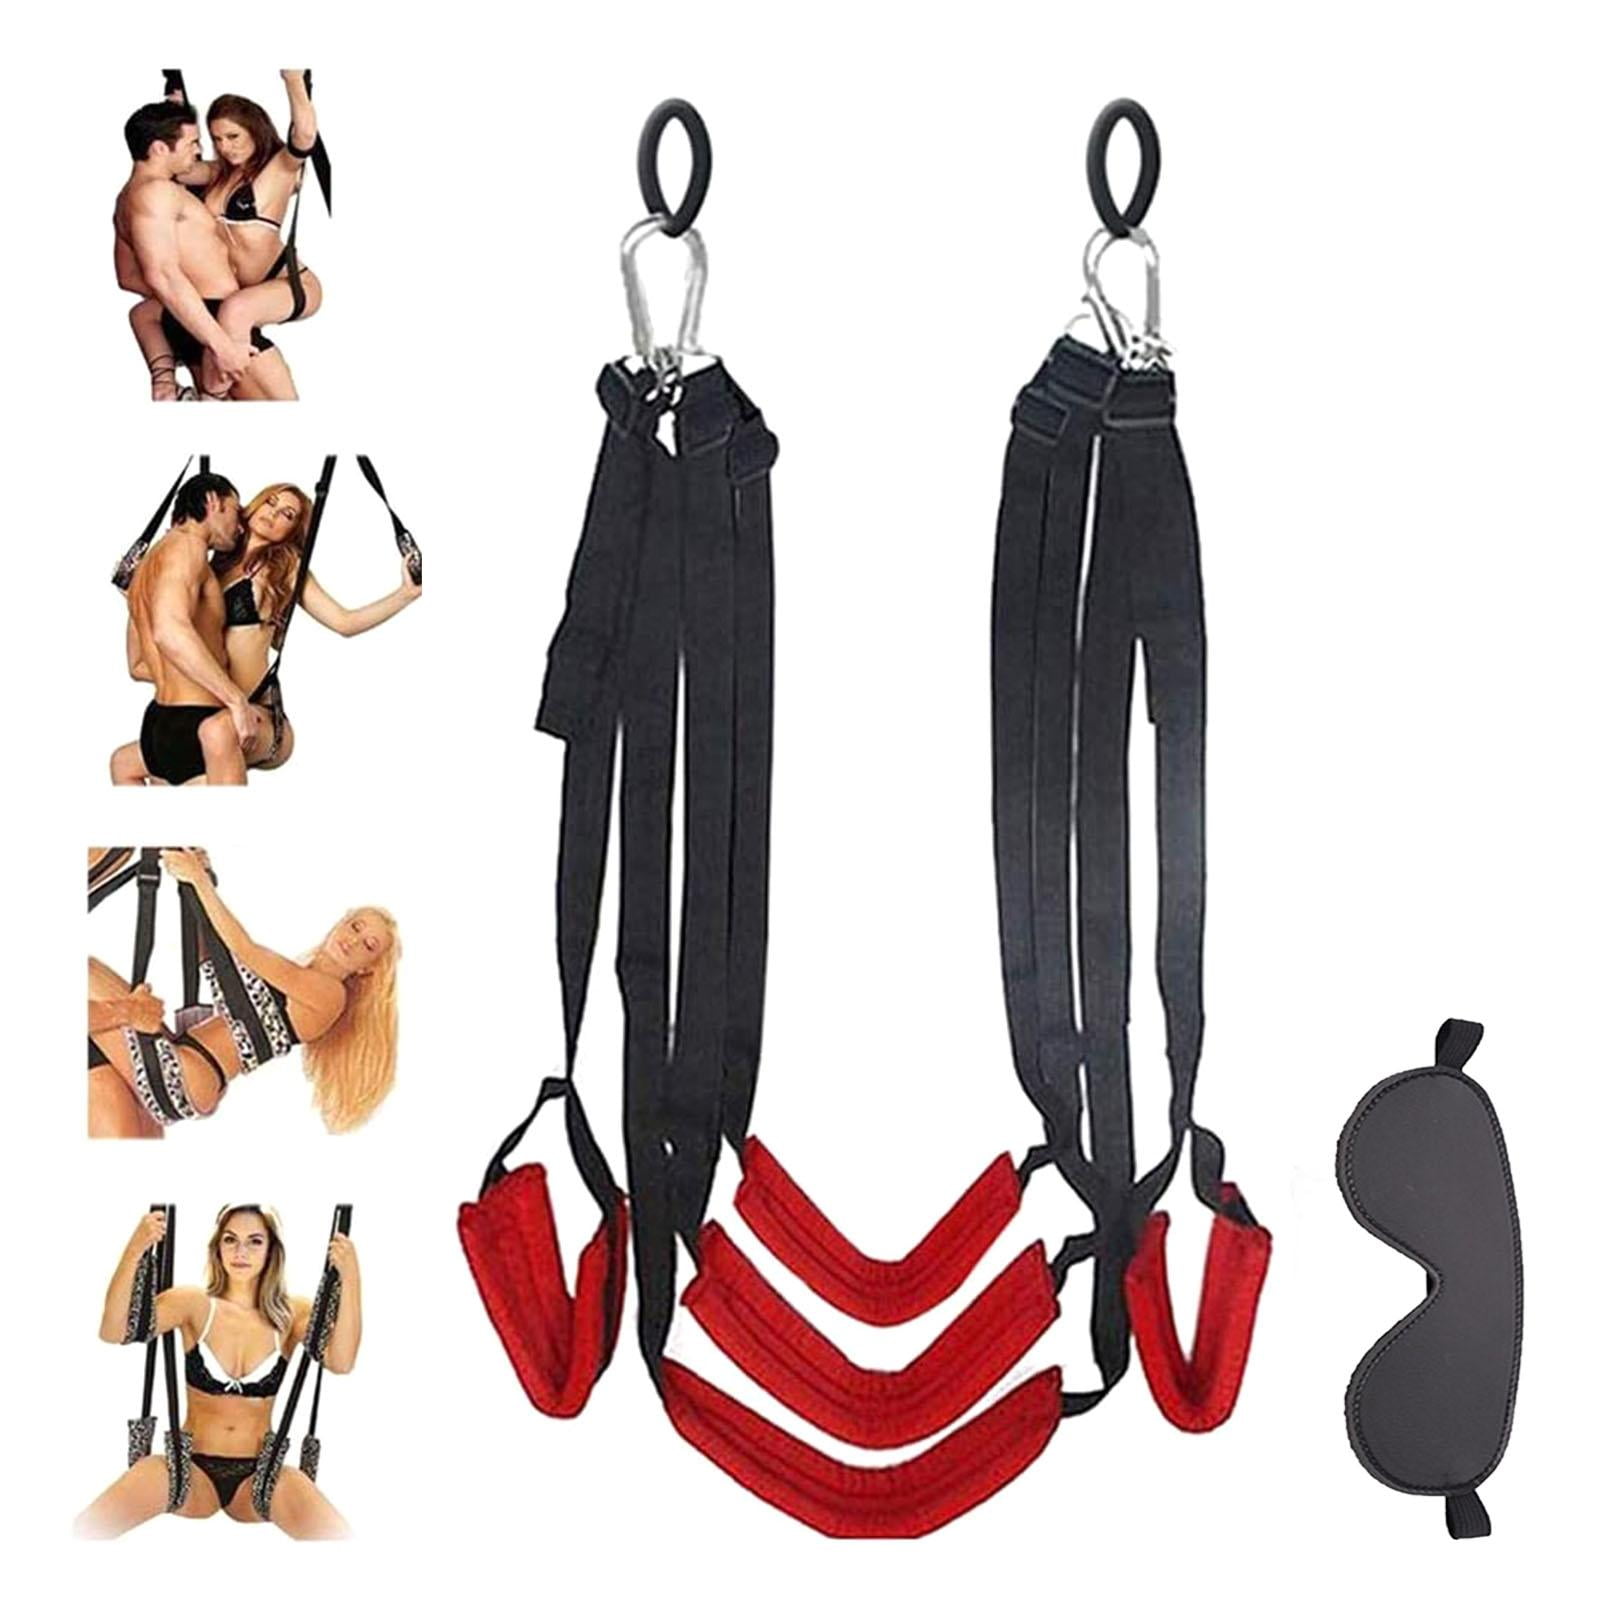 Aihome Couple Sex Swing Sm Sex Game Tool Kit Couple Sex Toy For Adults